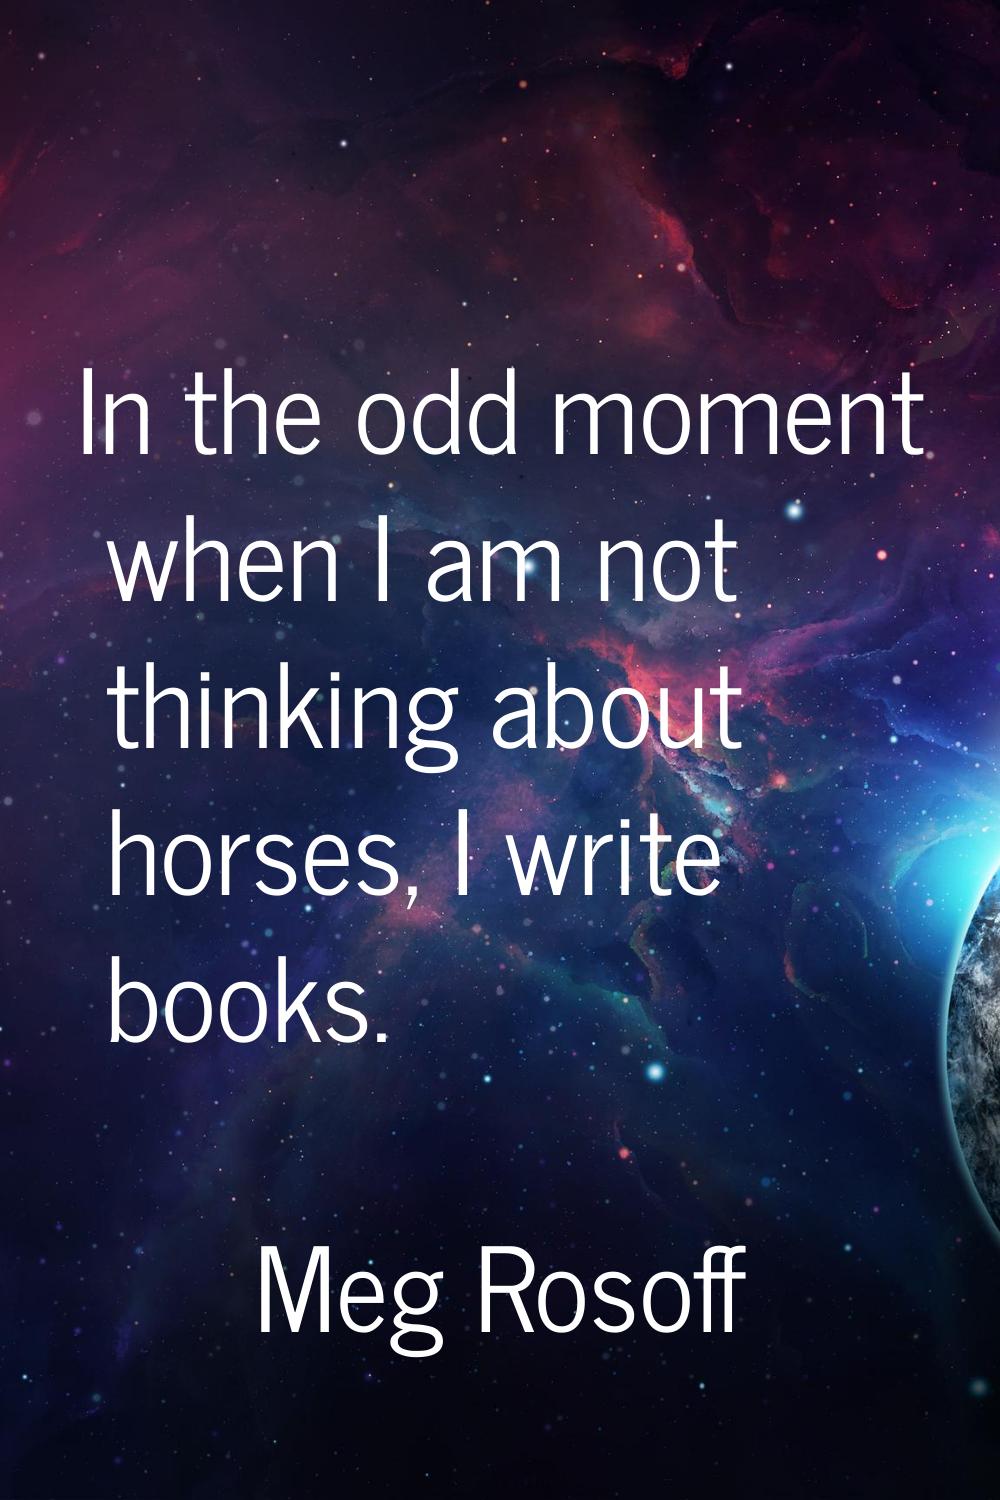 In the odd moment when I am not thinking about horses, I write books.